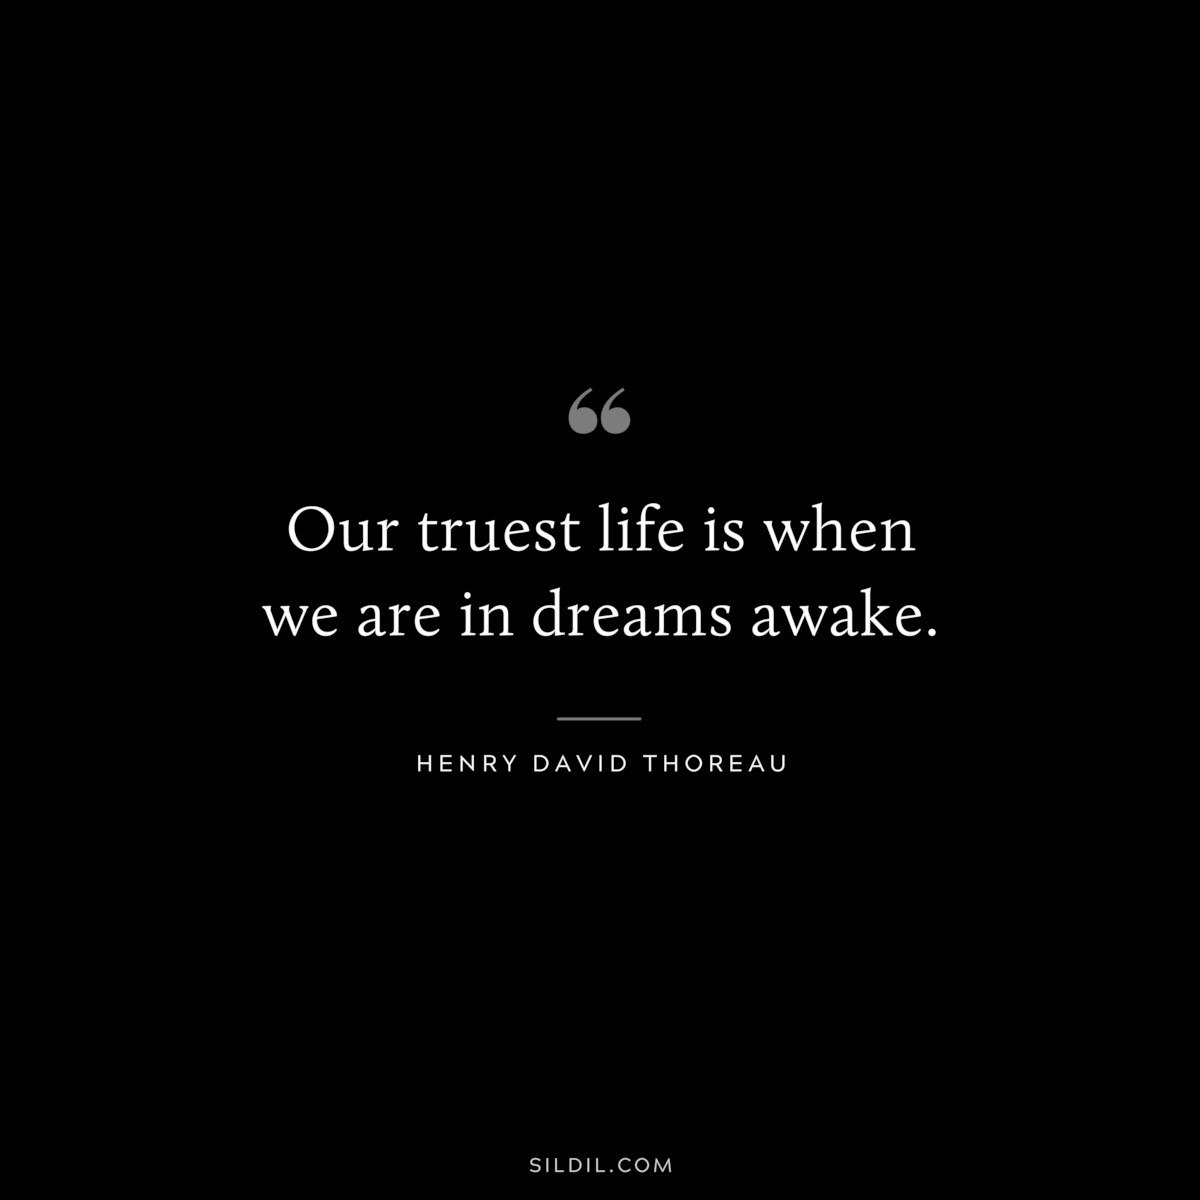 Our truest life is when we are in dreams awake. — Henry David Thoreau